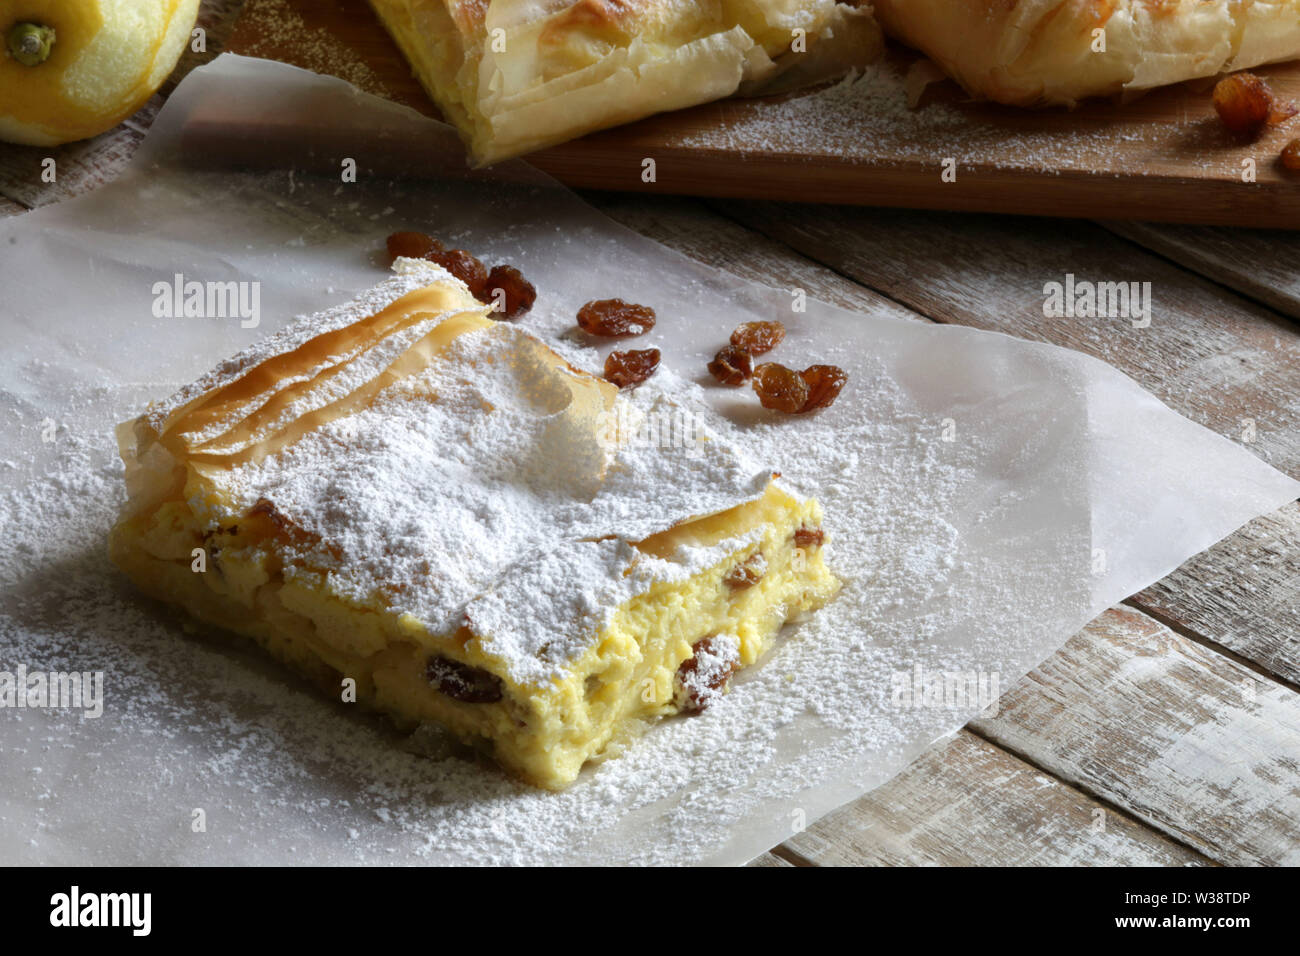 Traditional greek cuisine. Bougatsa, phyllo pastry filled with cream and sultanas, garnished with powdered sugar on wooden table. Stock Photo